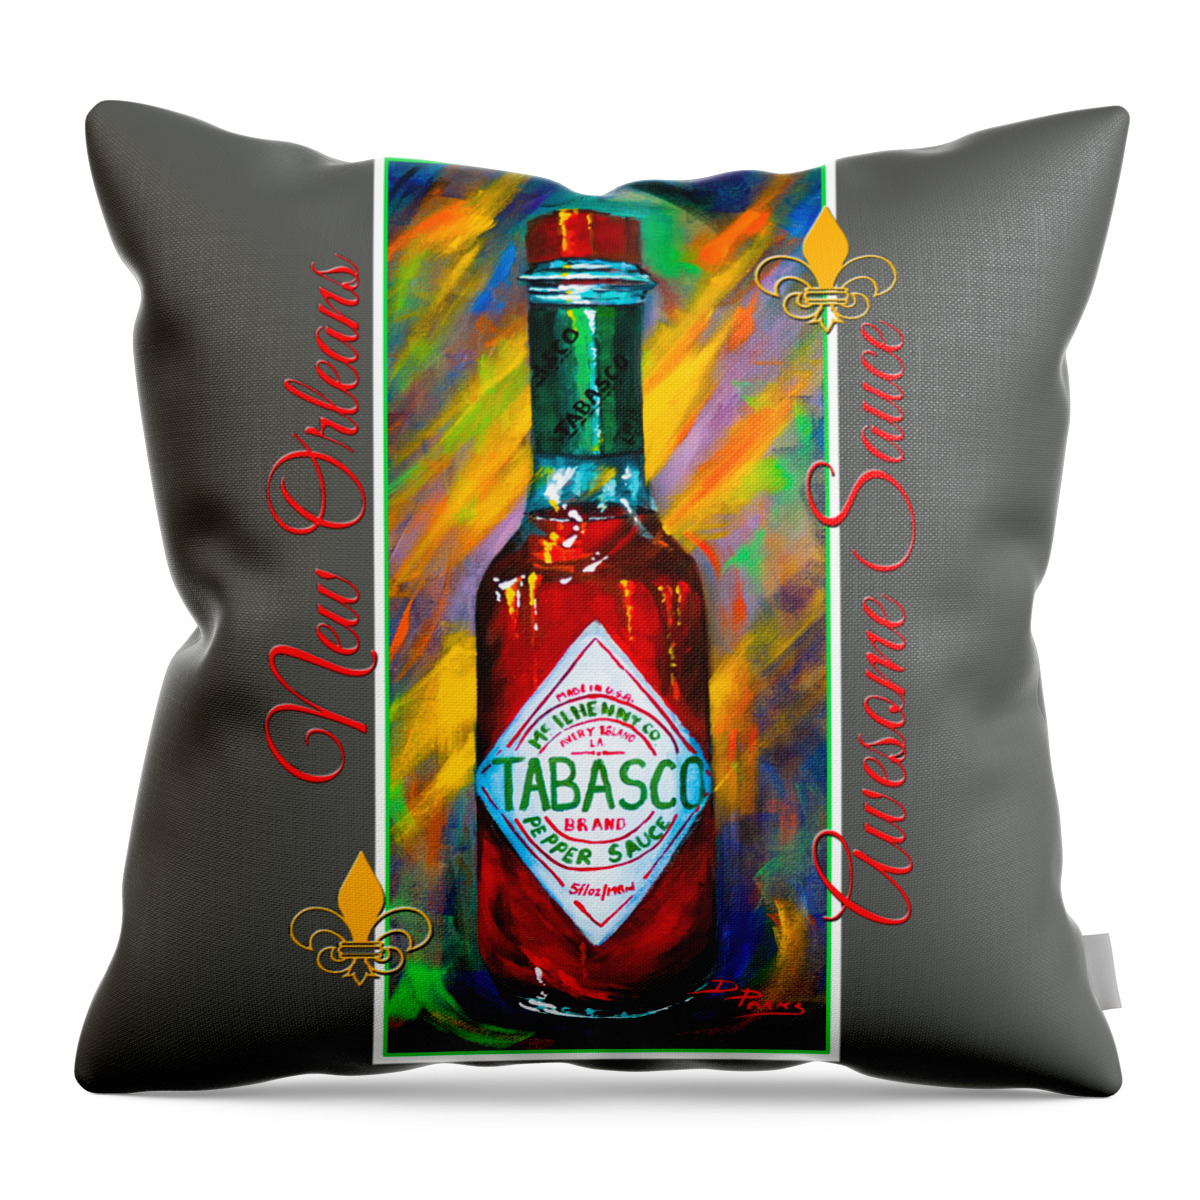  Louisiana Hot Sauce Throw Pillow featuring the painting Awesome Sauce - Tabasco by Dianne Parks